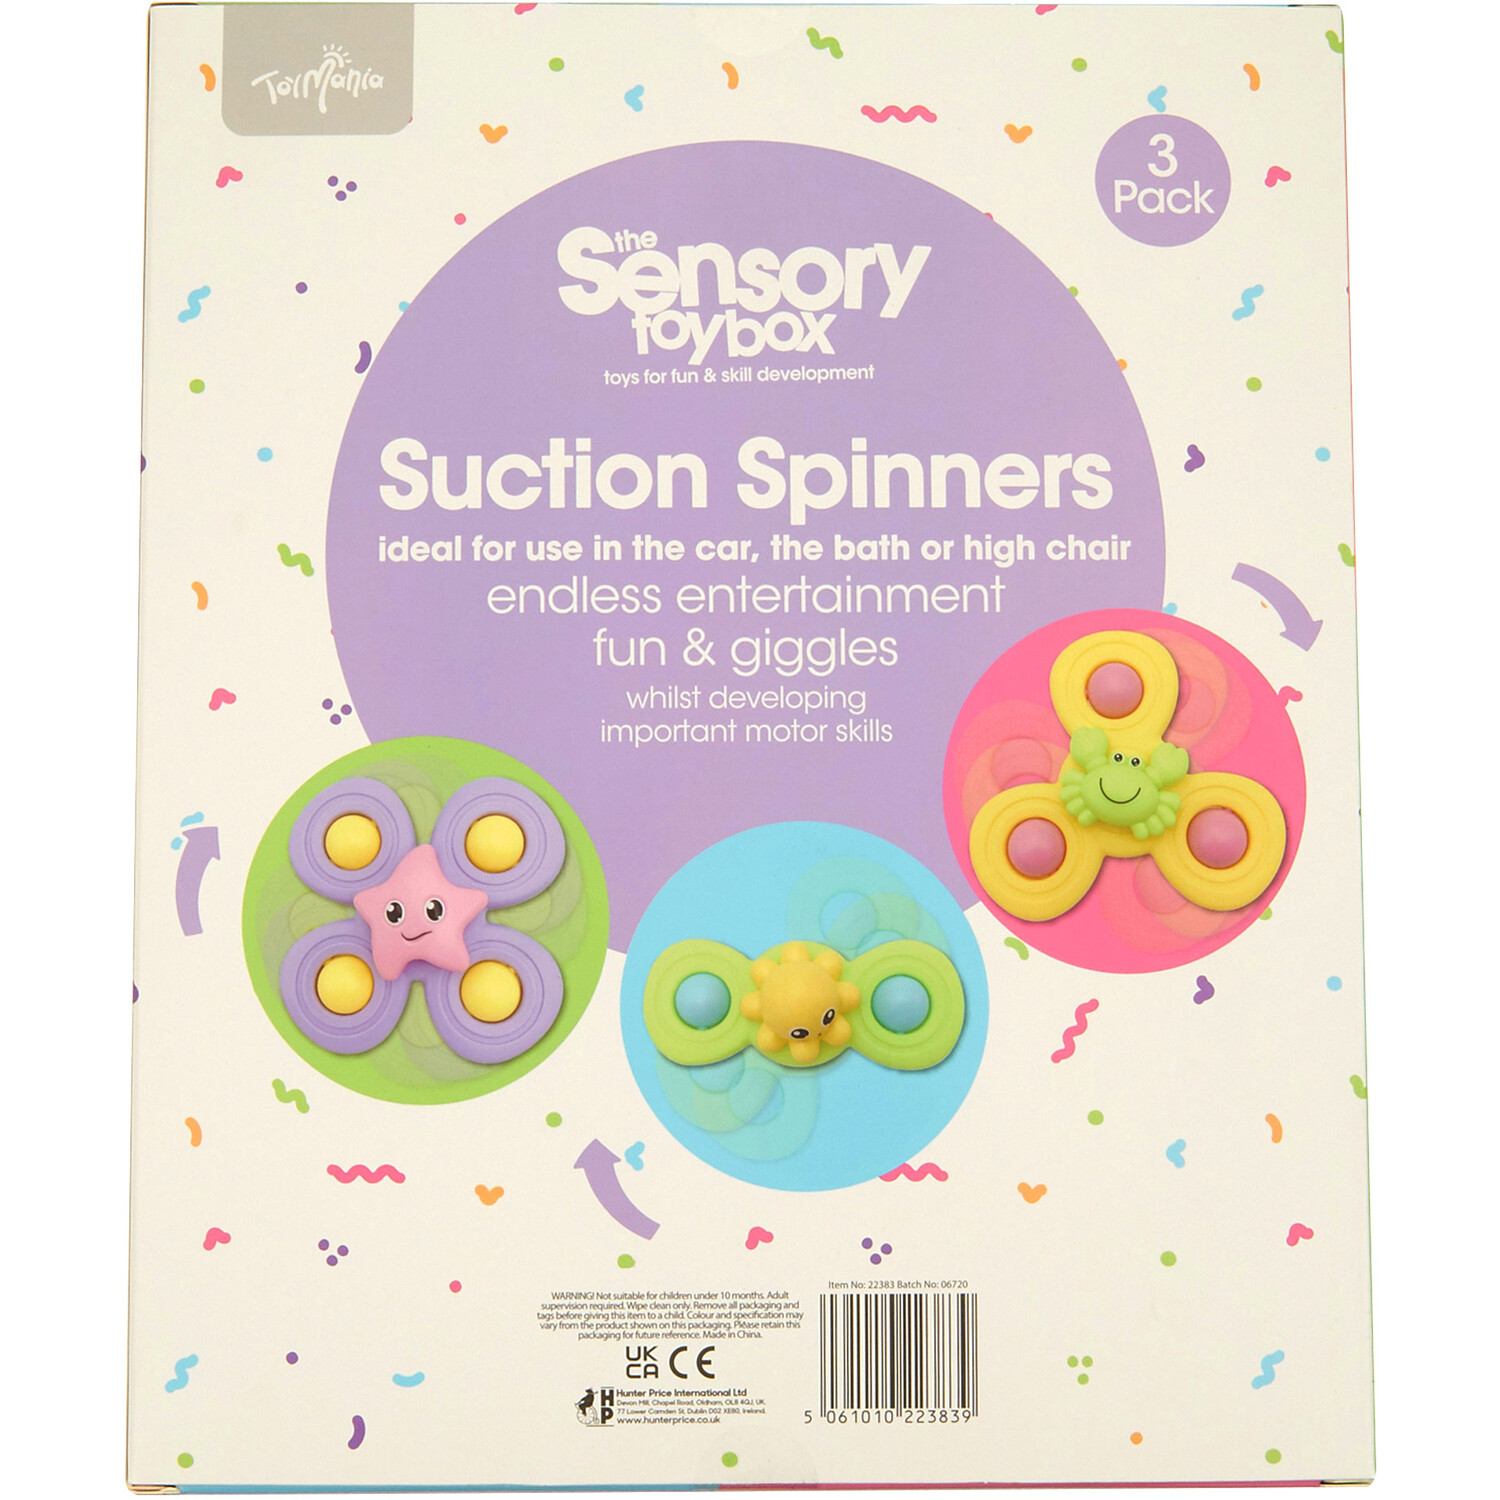 ToyMania Suction Spinners Bath Toy 3 Pack Image 5